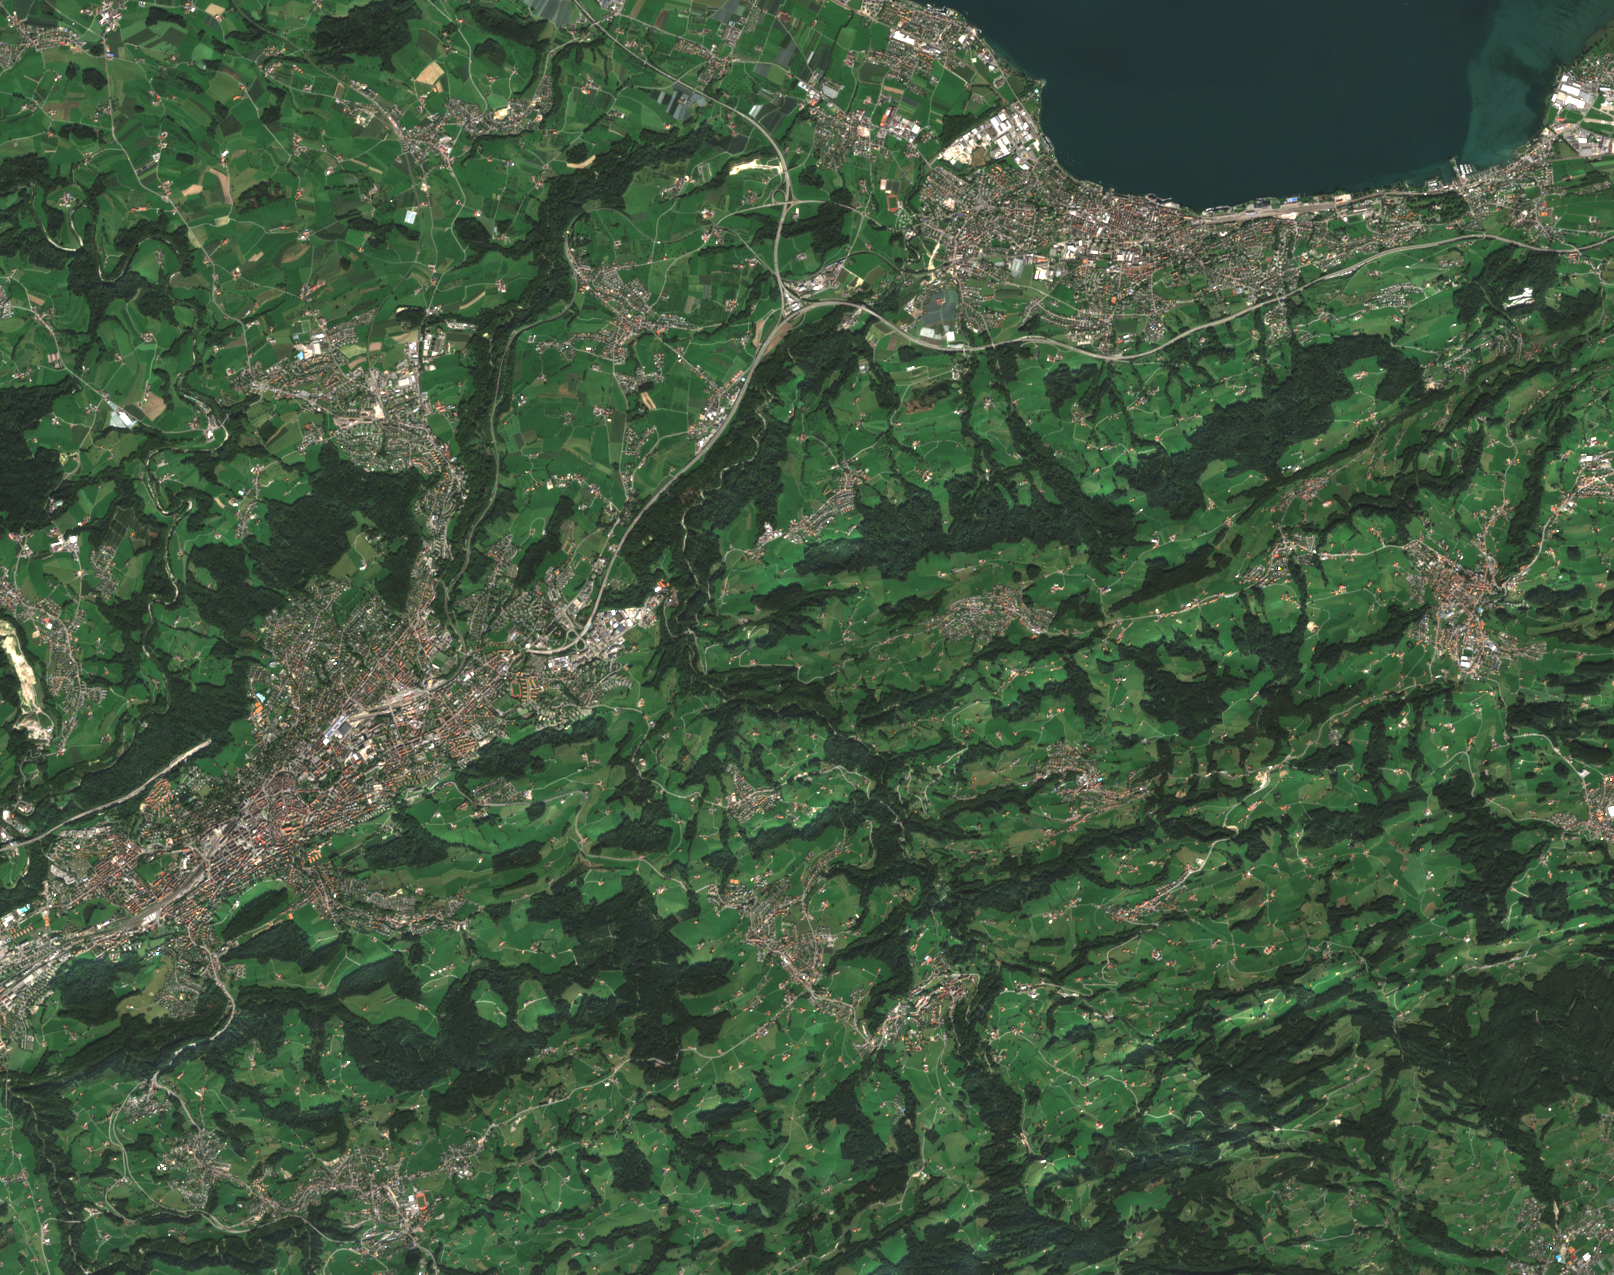 Satellite image of the St. Gallen area as observed by one of the European Space Agency's Sentinel-2
satellites. The city of St. Gallen is located on the left with Lake Constance at the top and the Appenzell area to the 
right.